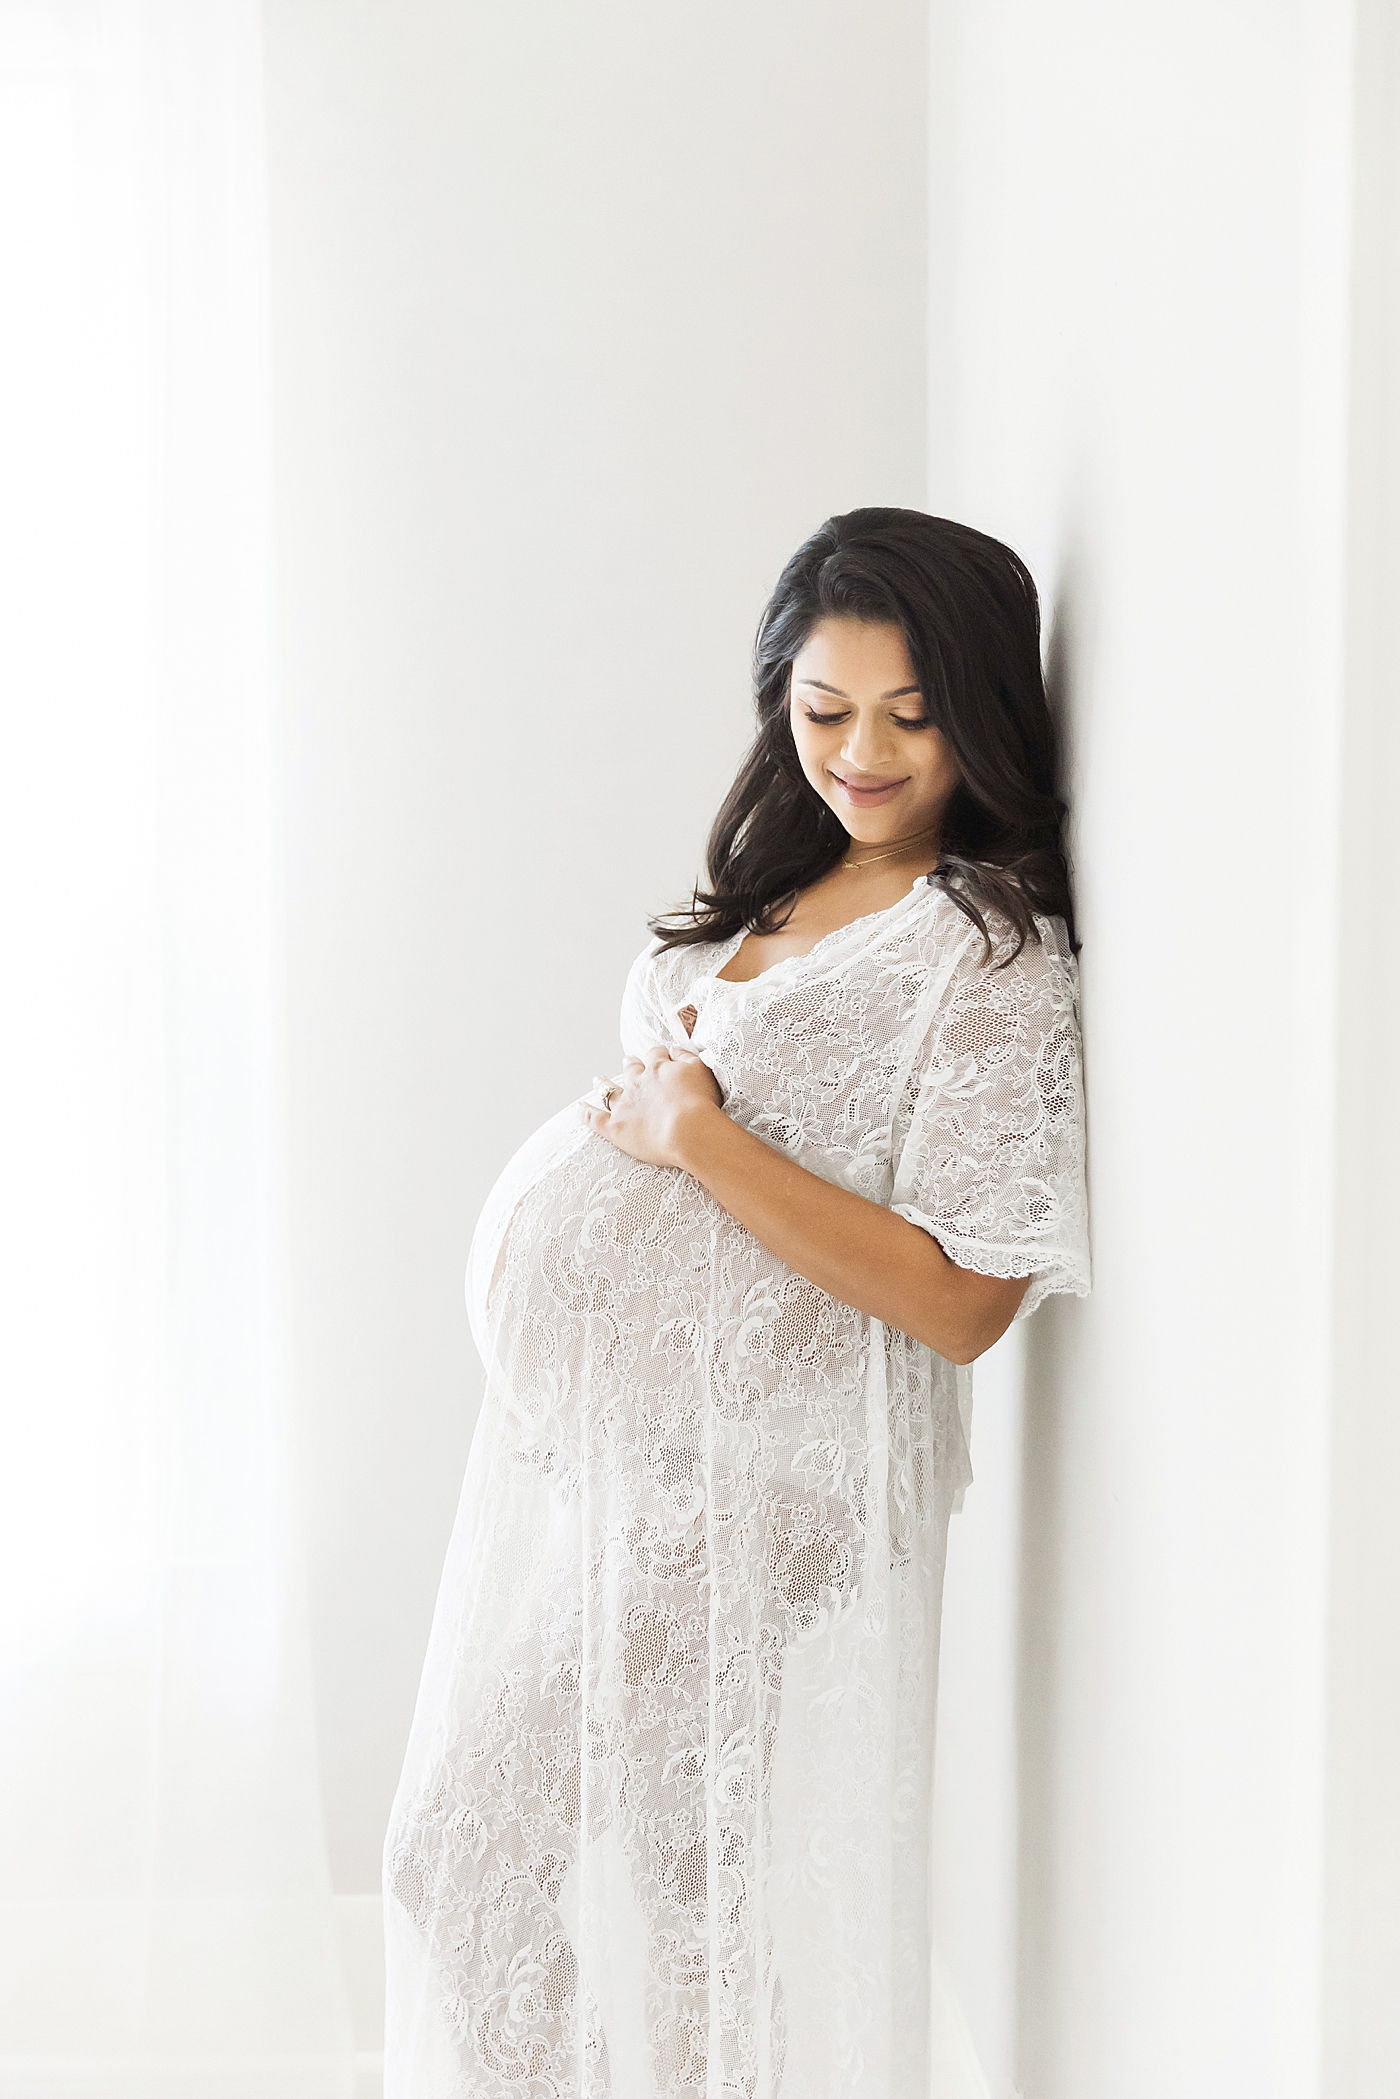 Twin maternity session with Houston Maternity Photographer, Fresh Light Photography.